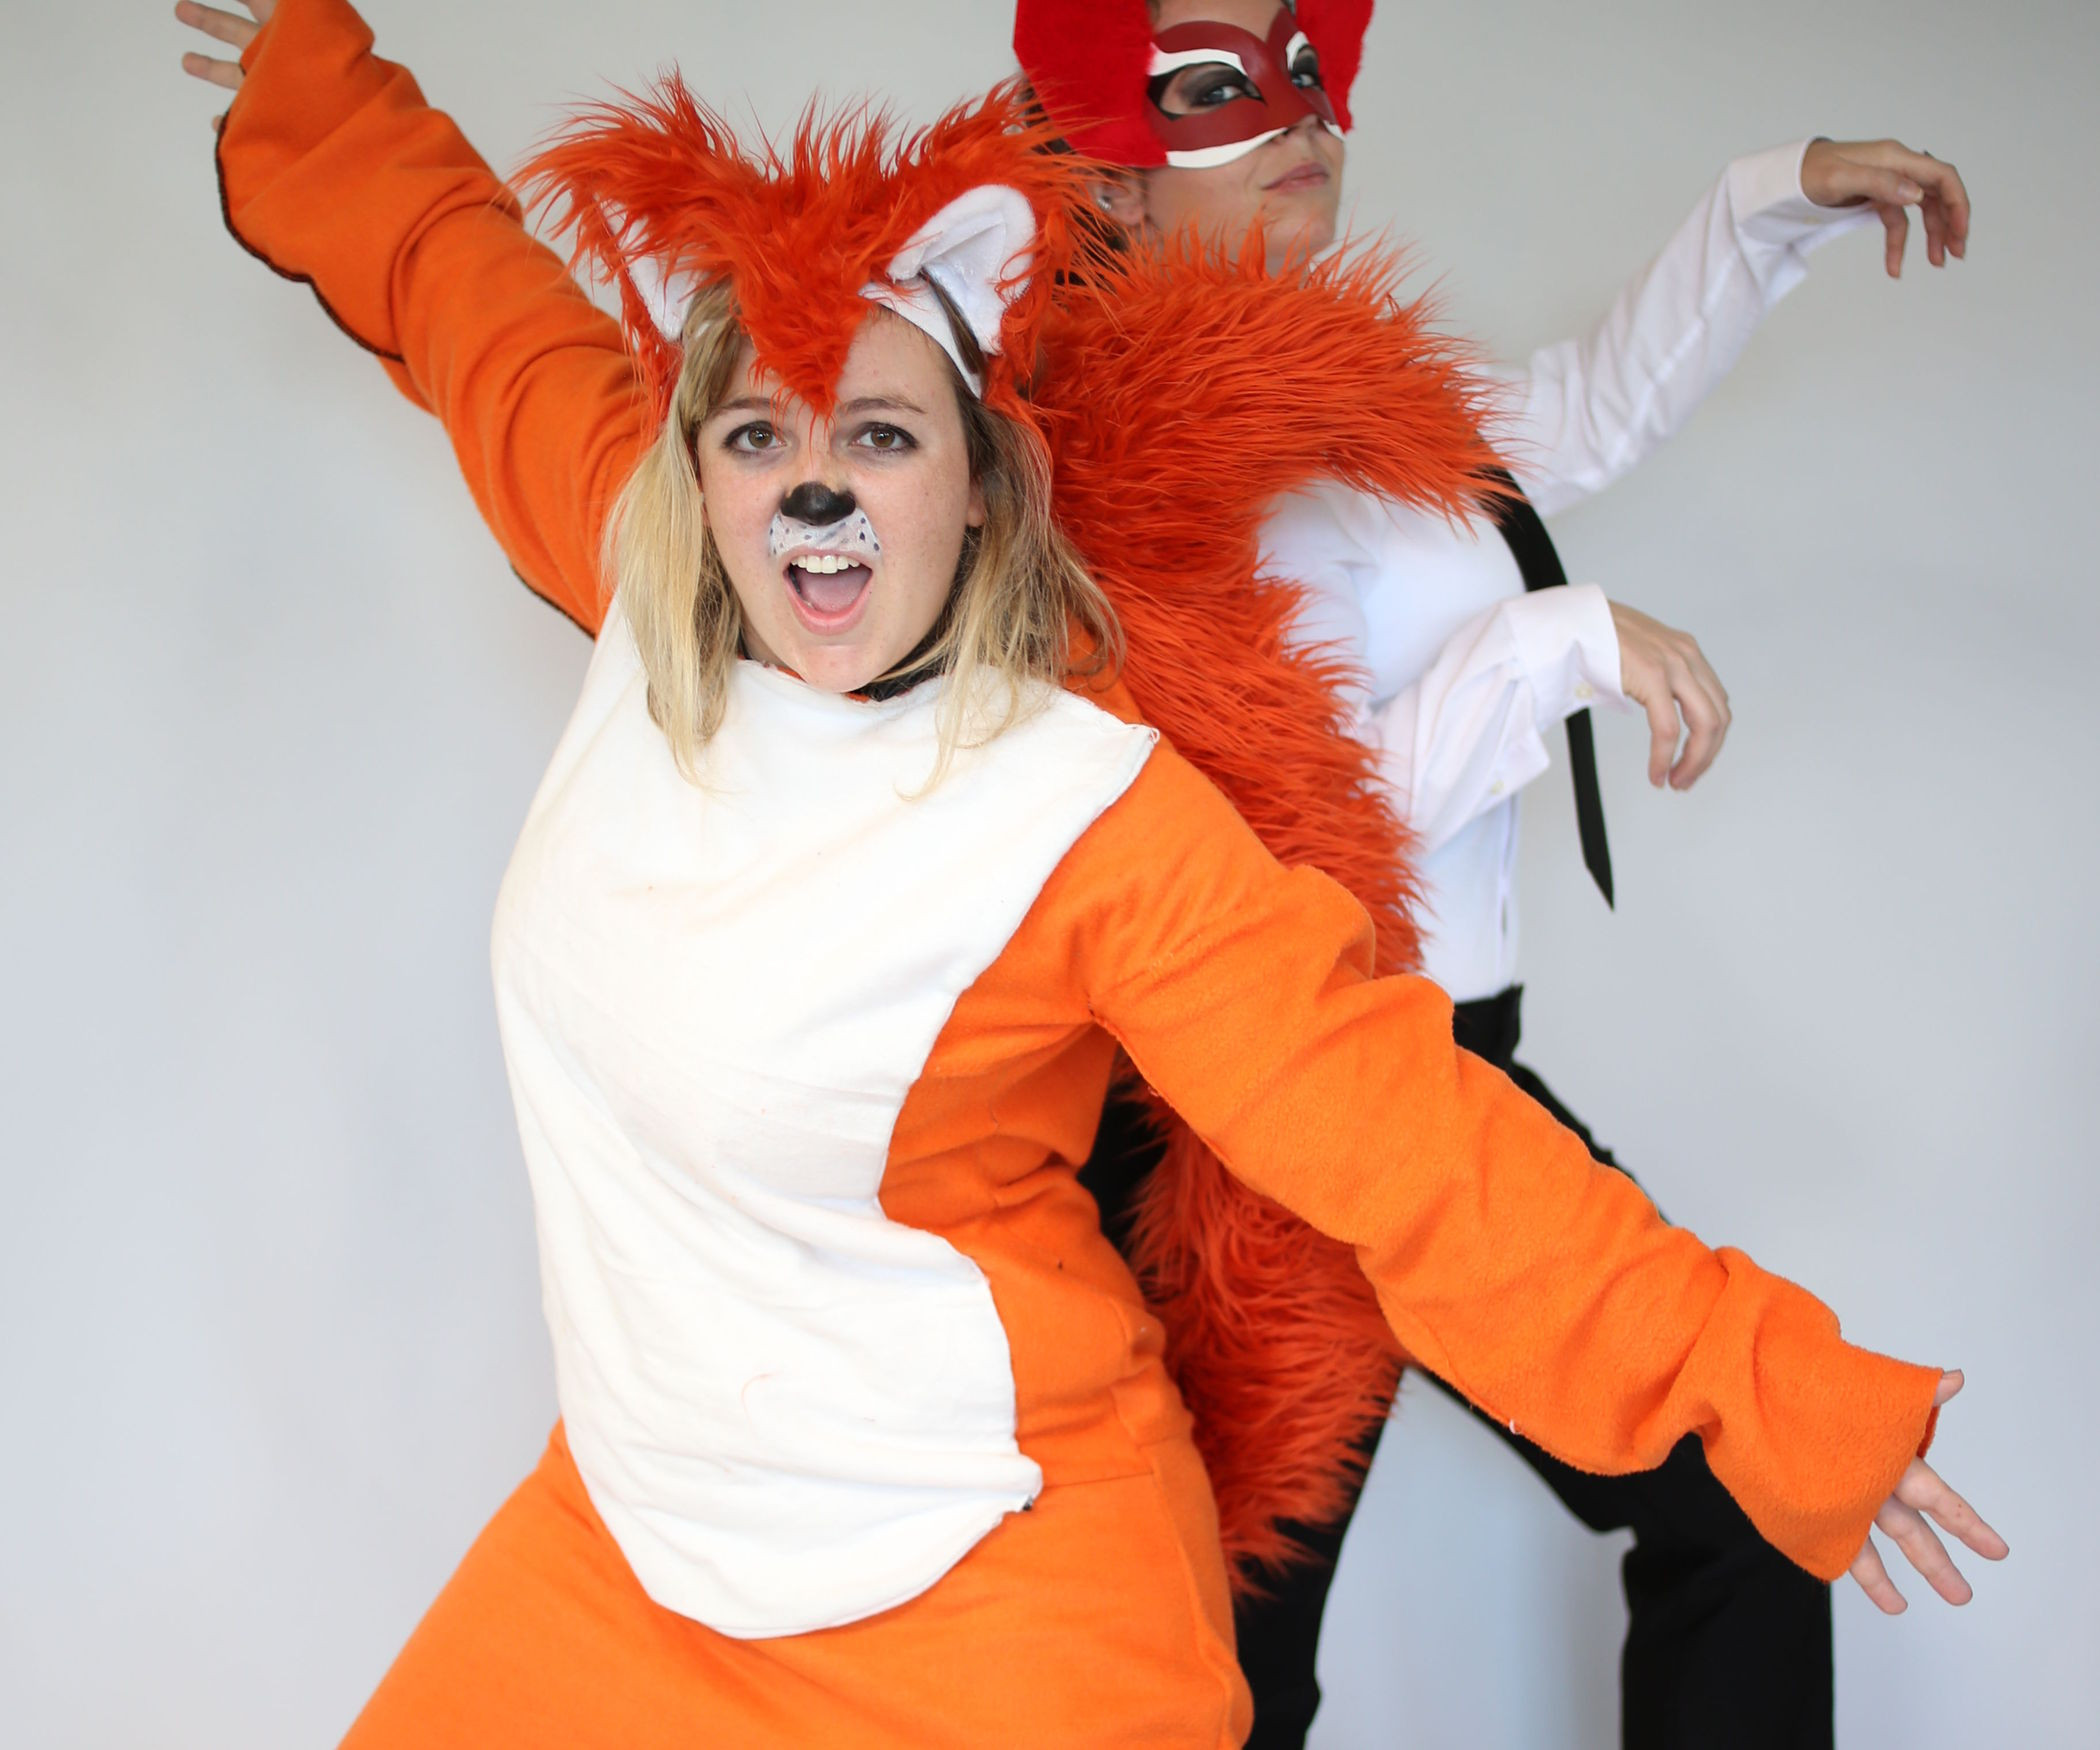 DIY Fox Costumes
 Homemade "What Does the Fox Say" costume